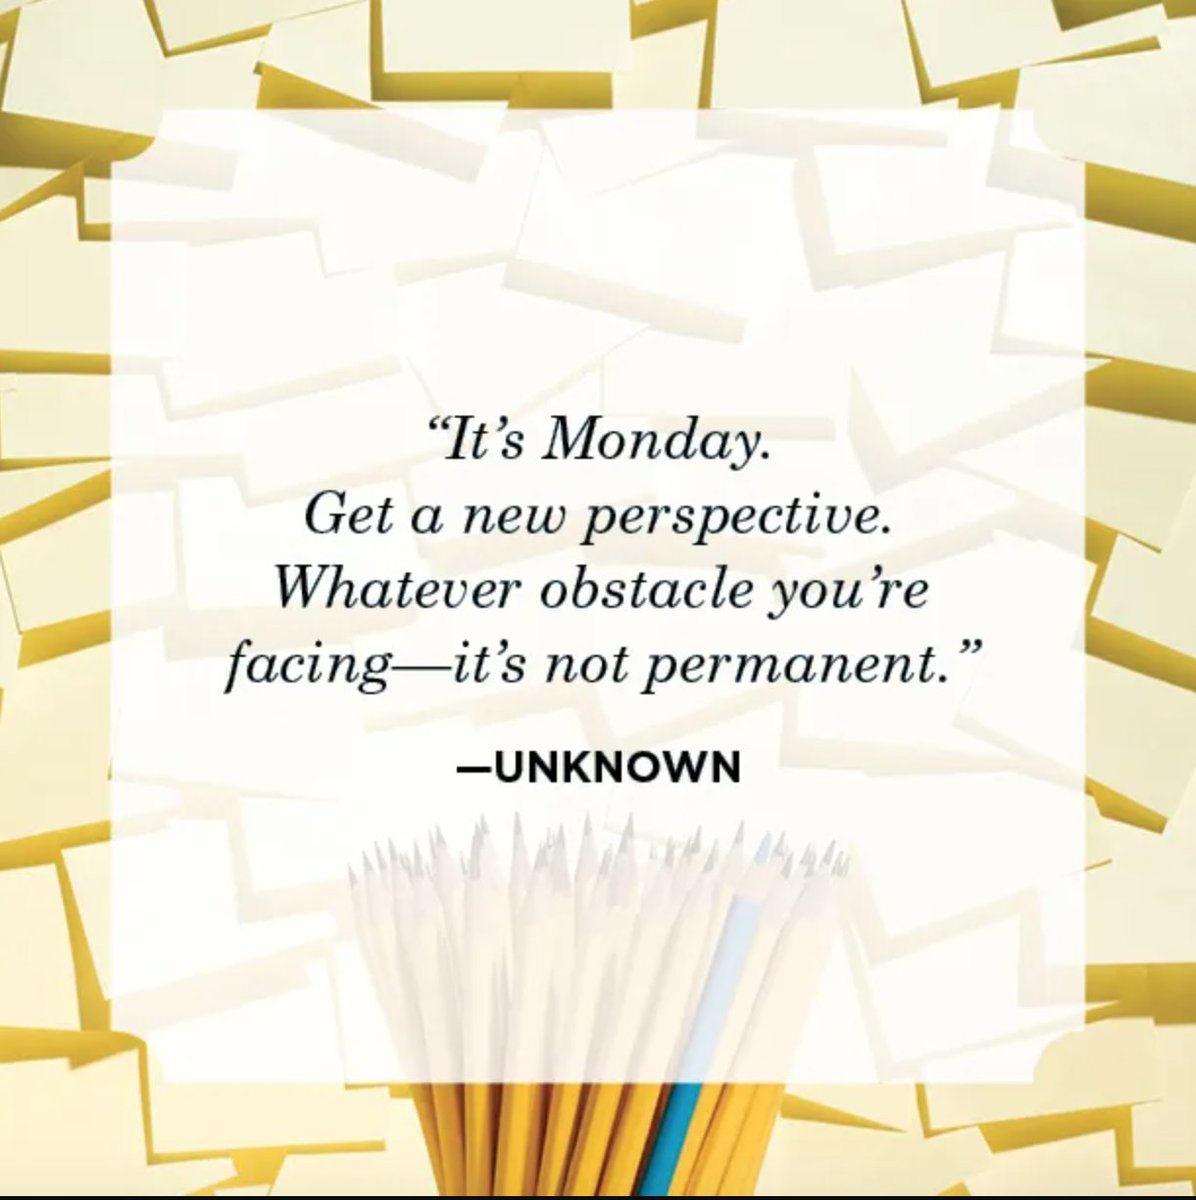 Happy Monday from Invincible Me UK! Whatever obstacle you're facing - it's not permanent. #MentalHealth #MentalHealthUK #UKNonprofit #UKCharity #MentalHealthAwareness